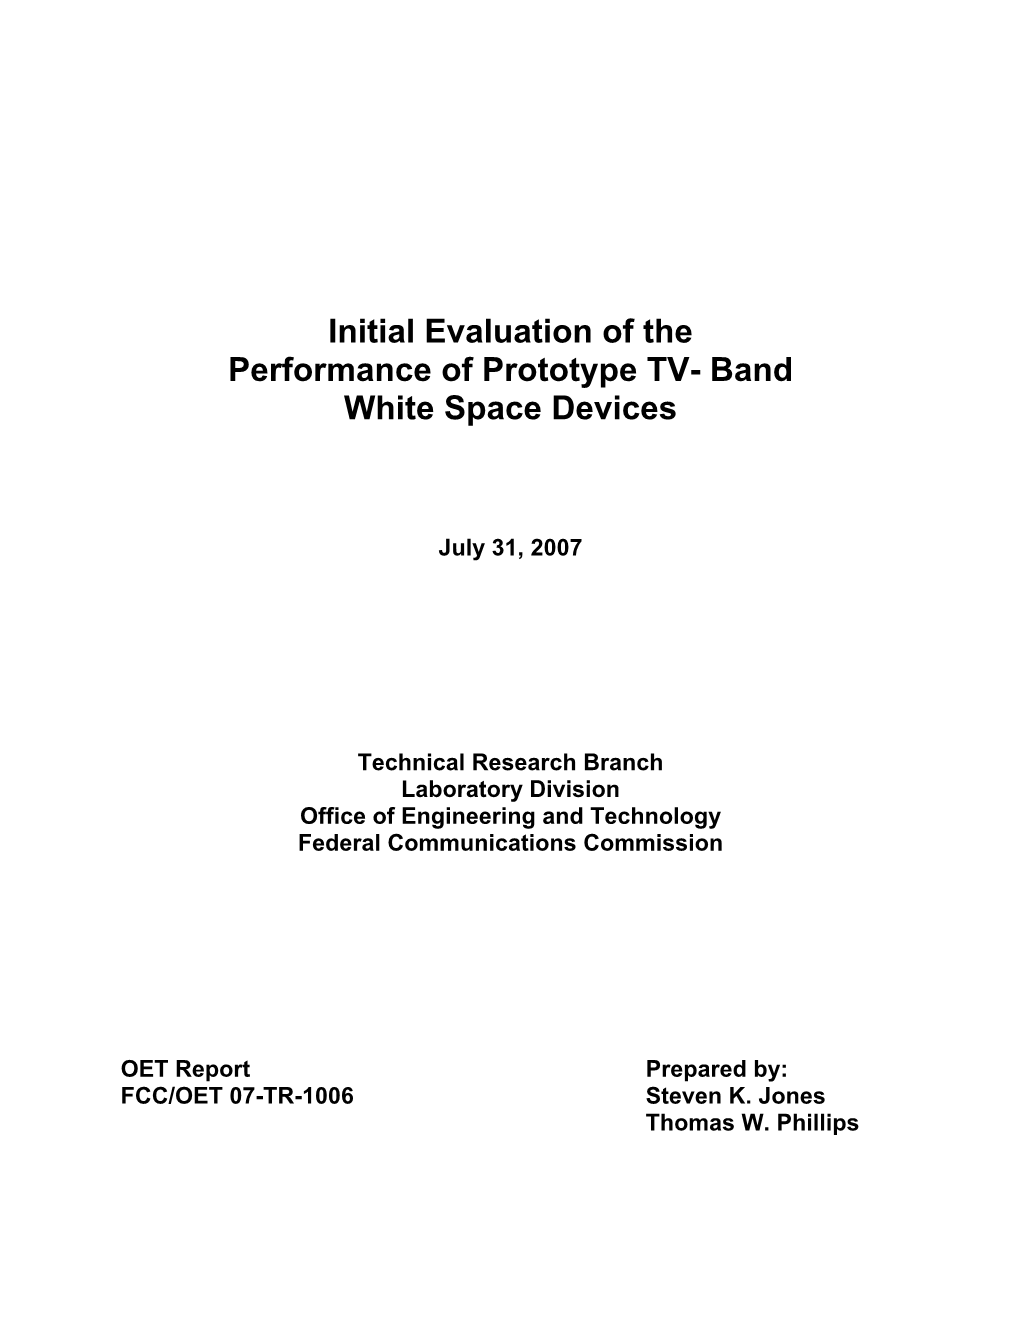 Initial Evaluation of the Performance of Prototype TV- Band White Space Devices